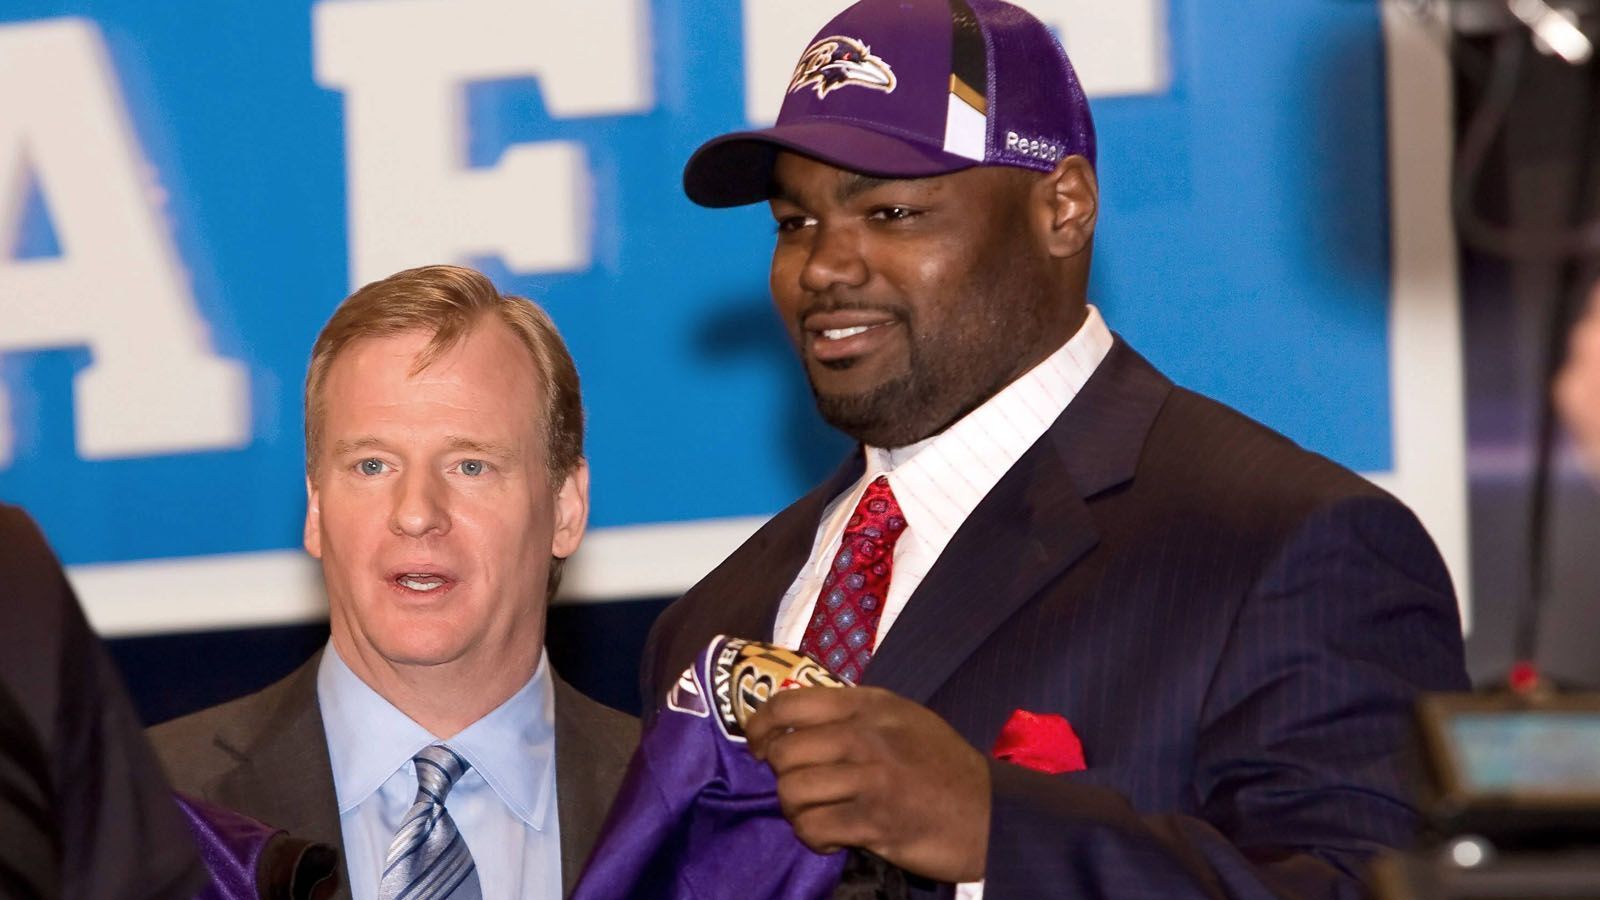 
                <strong>Michael Oher (Free Agent)</strong><br>
                College: Ole Miss RebelsPosition: Offensive TackleIn der NFL seit: 2009
              